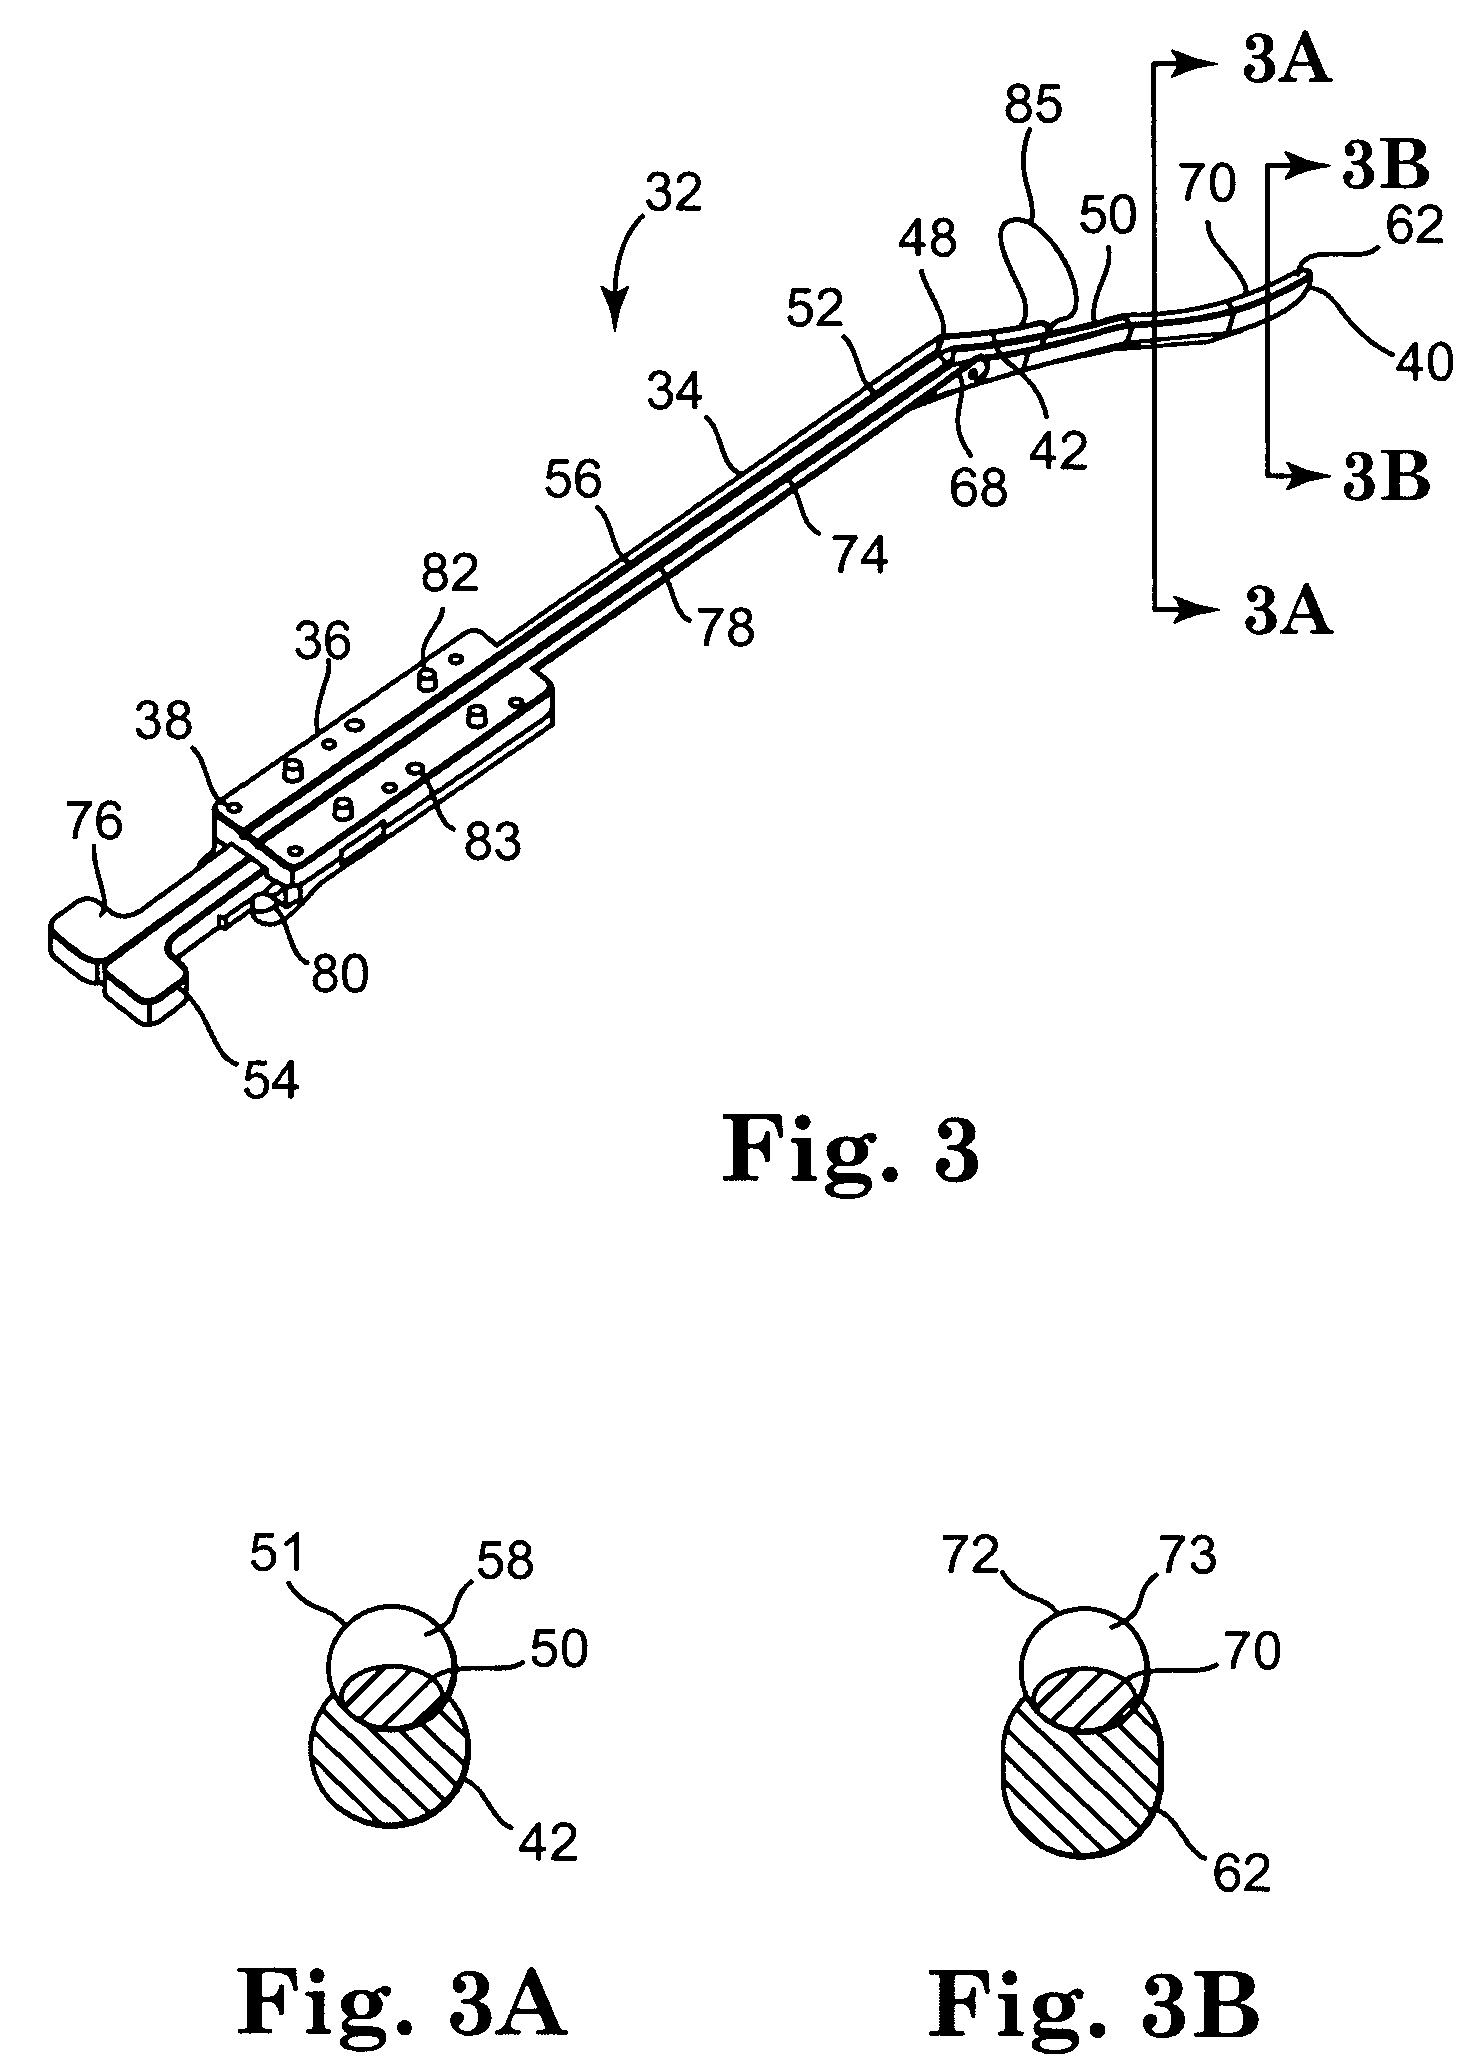 Compound bipolar ablation device and method